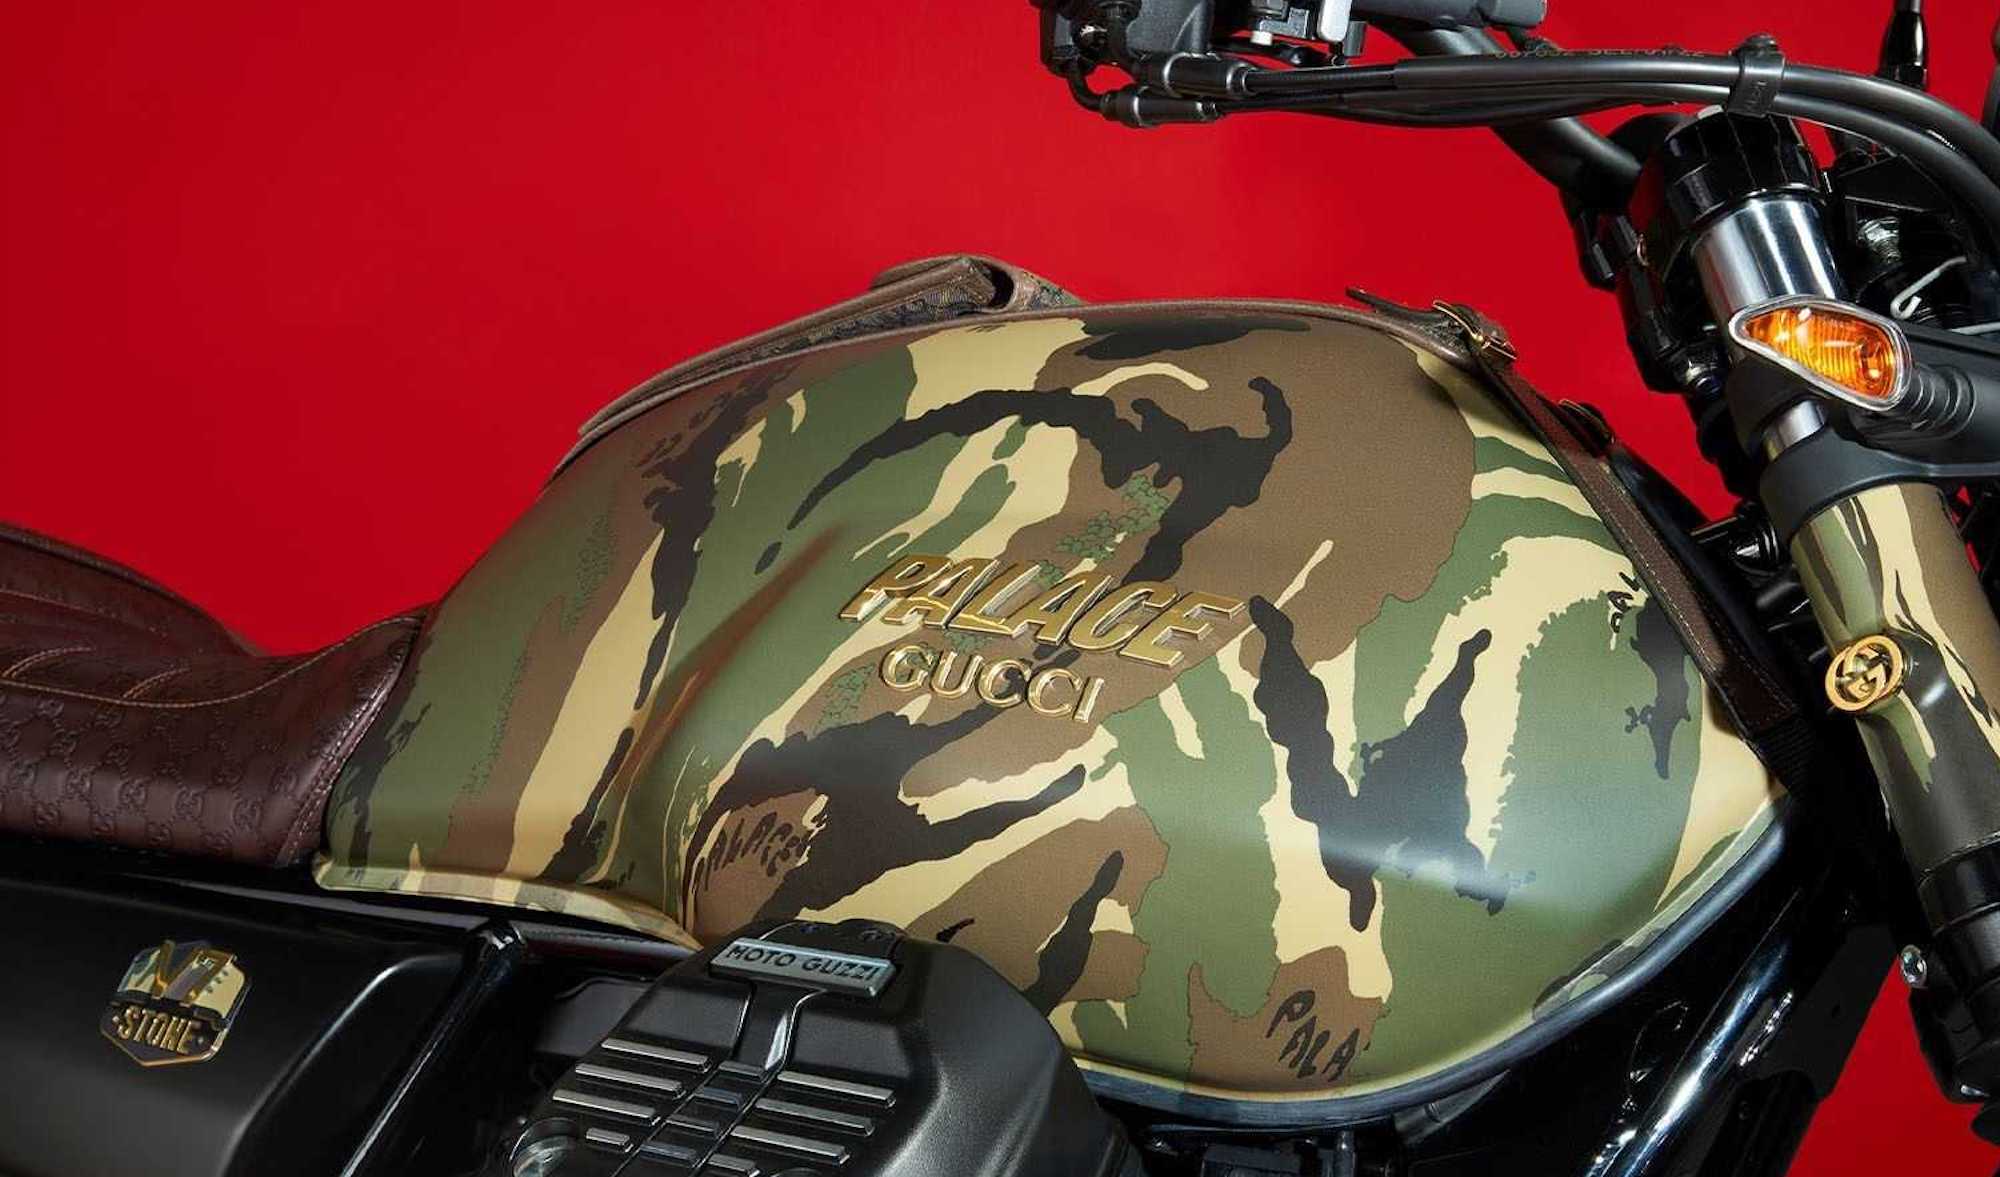 Moto Guzzi Joins The Gucci x Palace Collaboration With A Limited-Edition V7  Motorcycle